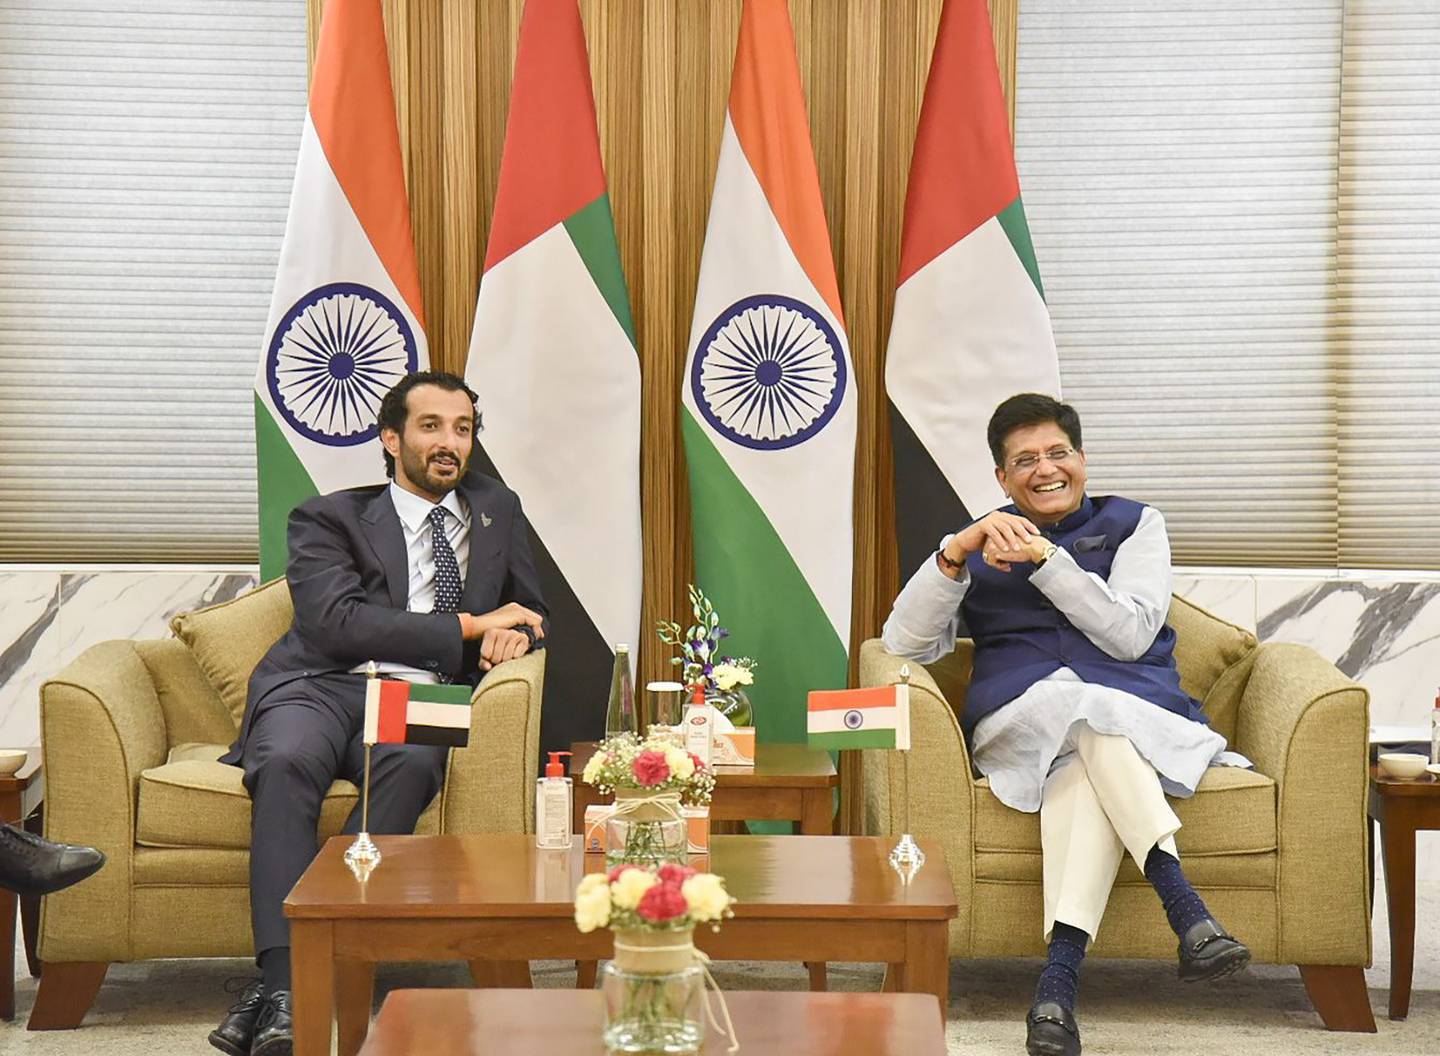 Abdulla Bin Touq AI Marri, Minister of Economy and Piyush Goyal, Minister of Commerce and Indusrty. Photo: India's Ministry of Commerce & Industry